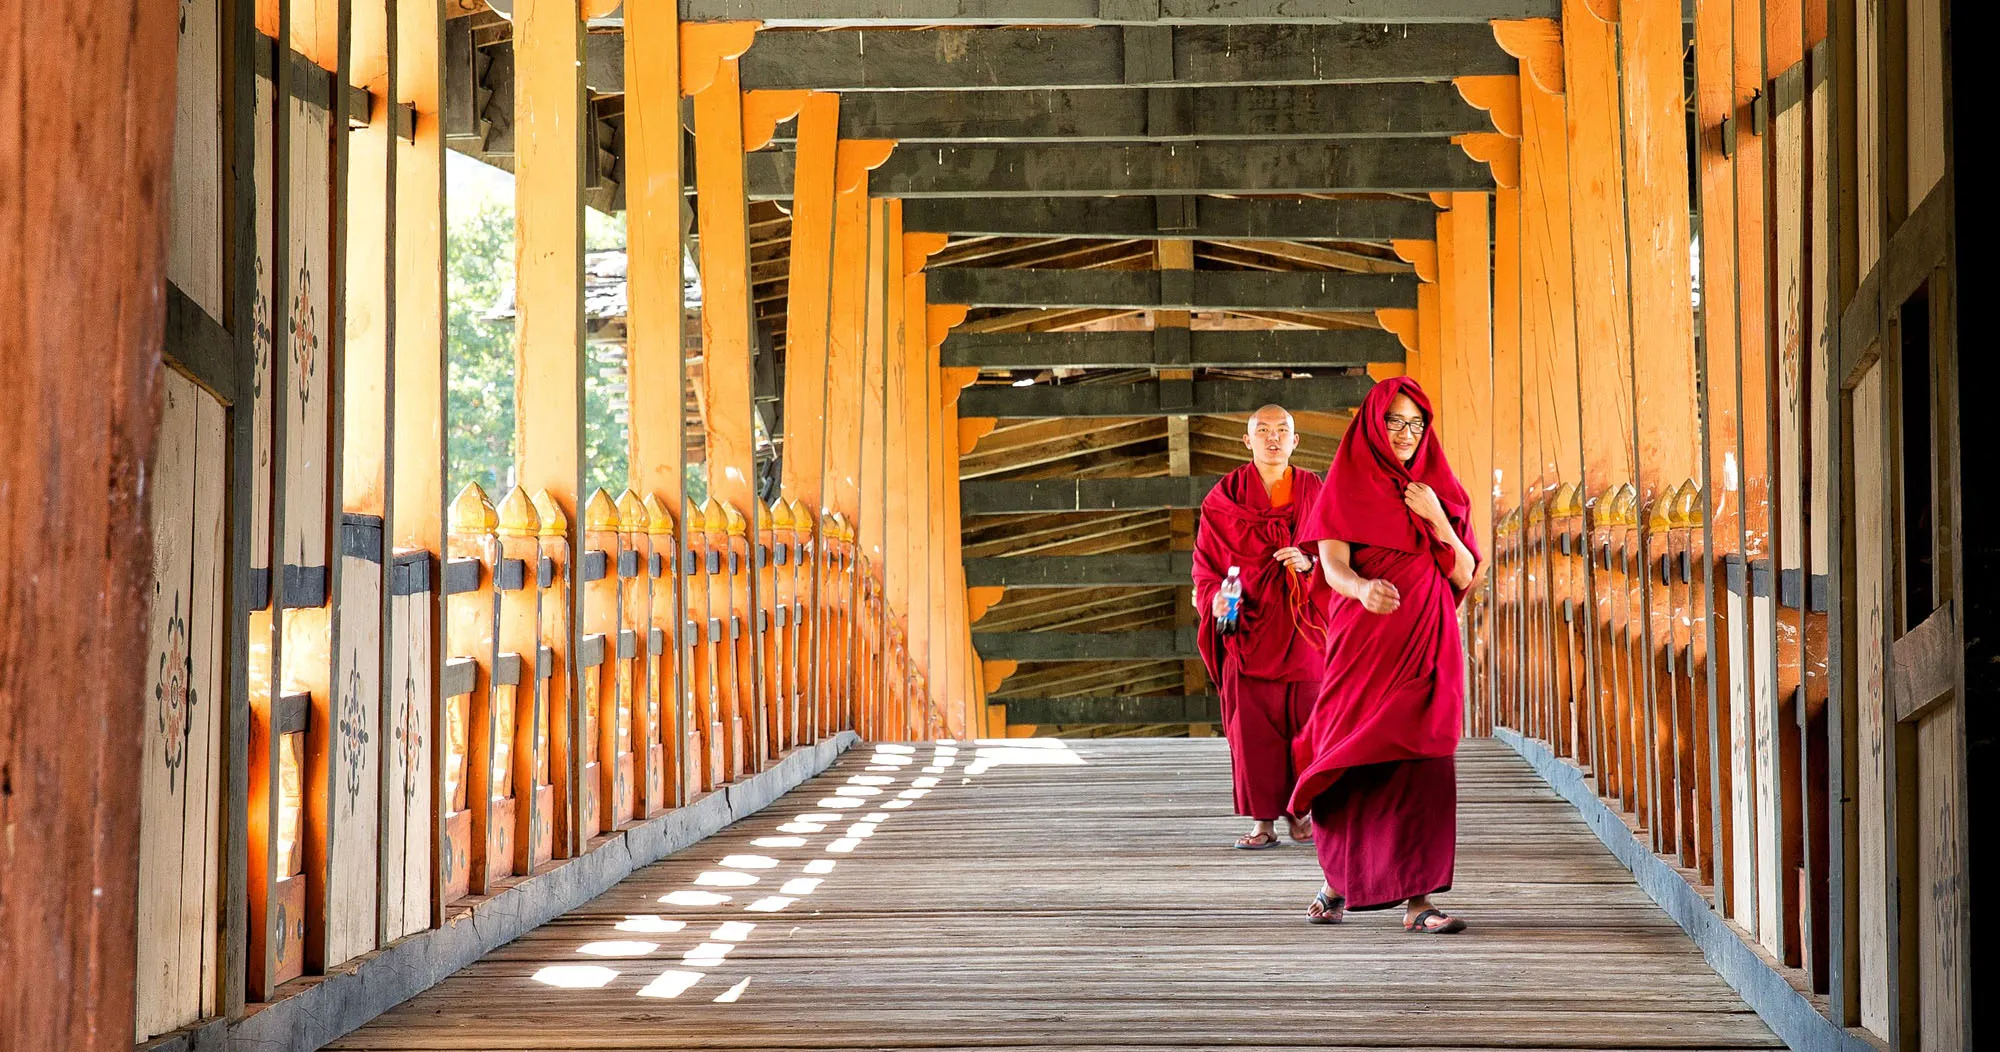 Featured image for “7 Day Bhutan Itinerary: Thimphu, Punakha, Paro & the Tiger’s Nest”